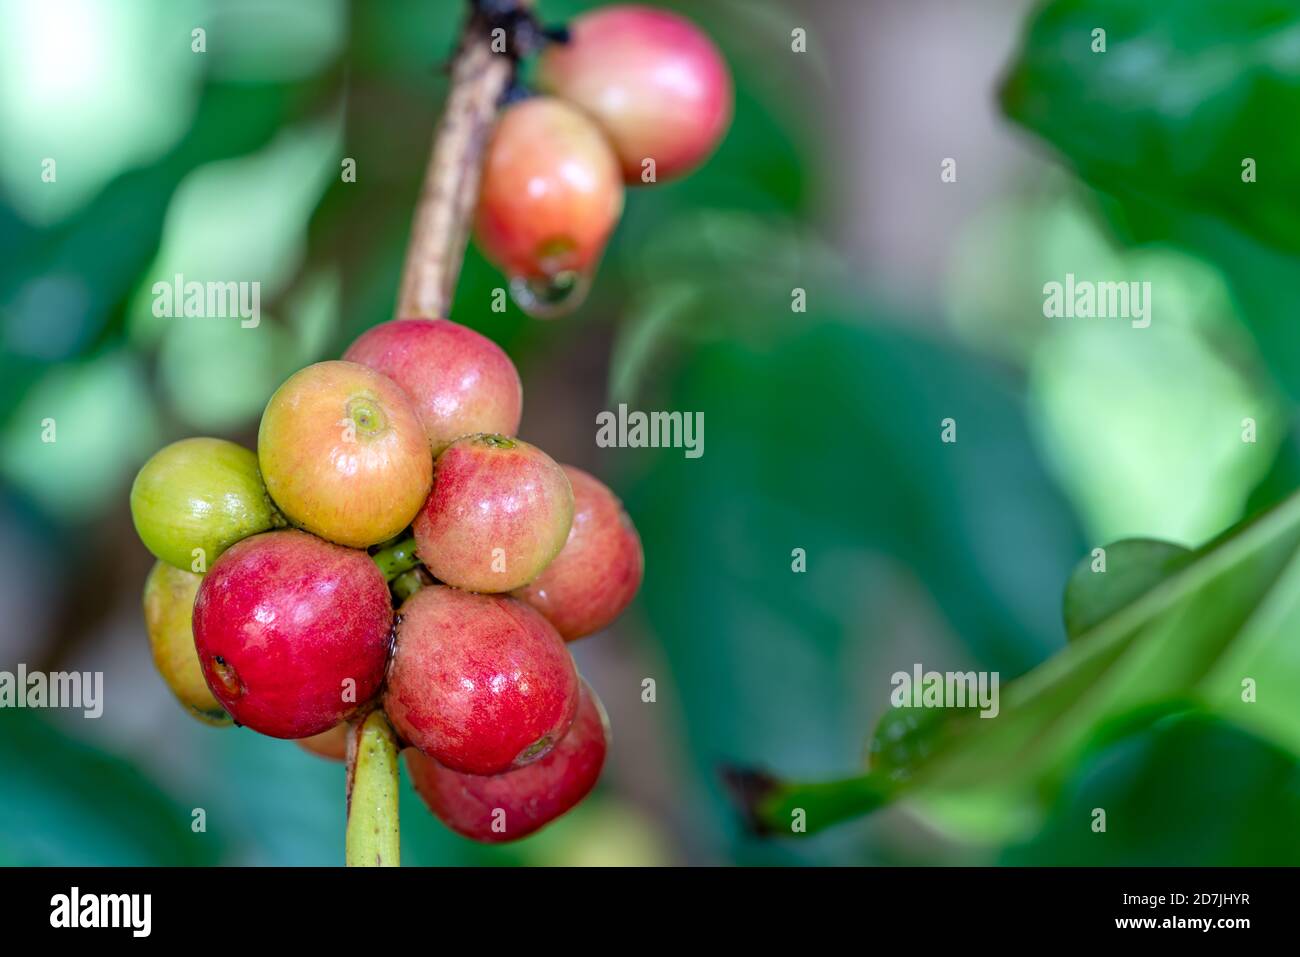 Closeup scene of bunch of coffee fruit on branch of a tree. The ripe coffee fruit have a distint sweet taste and are often juiced. Stock Photo